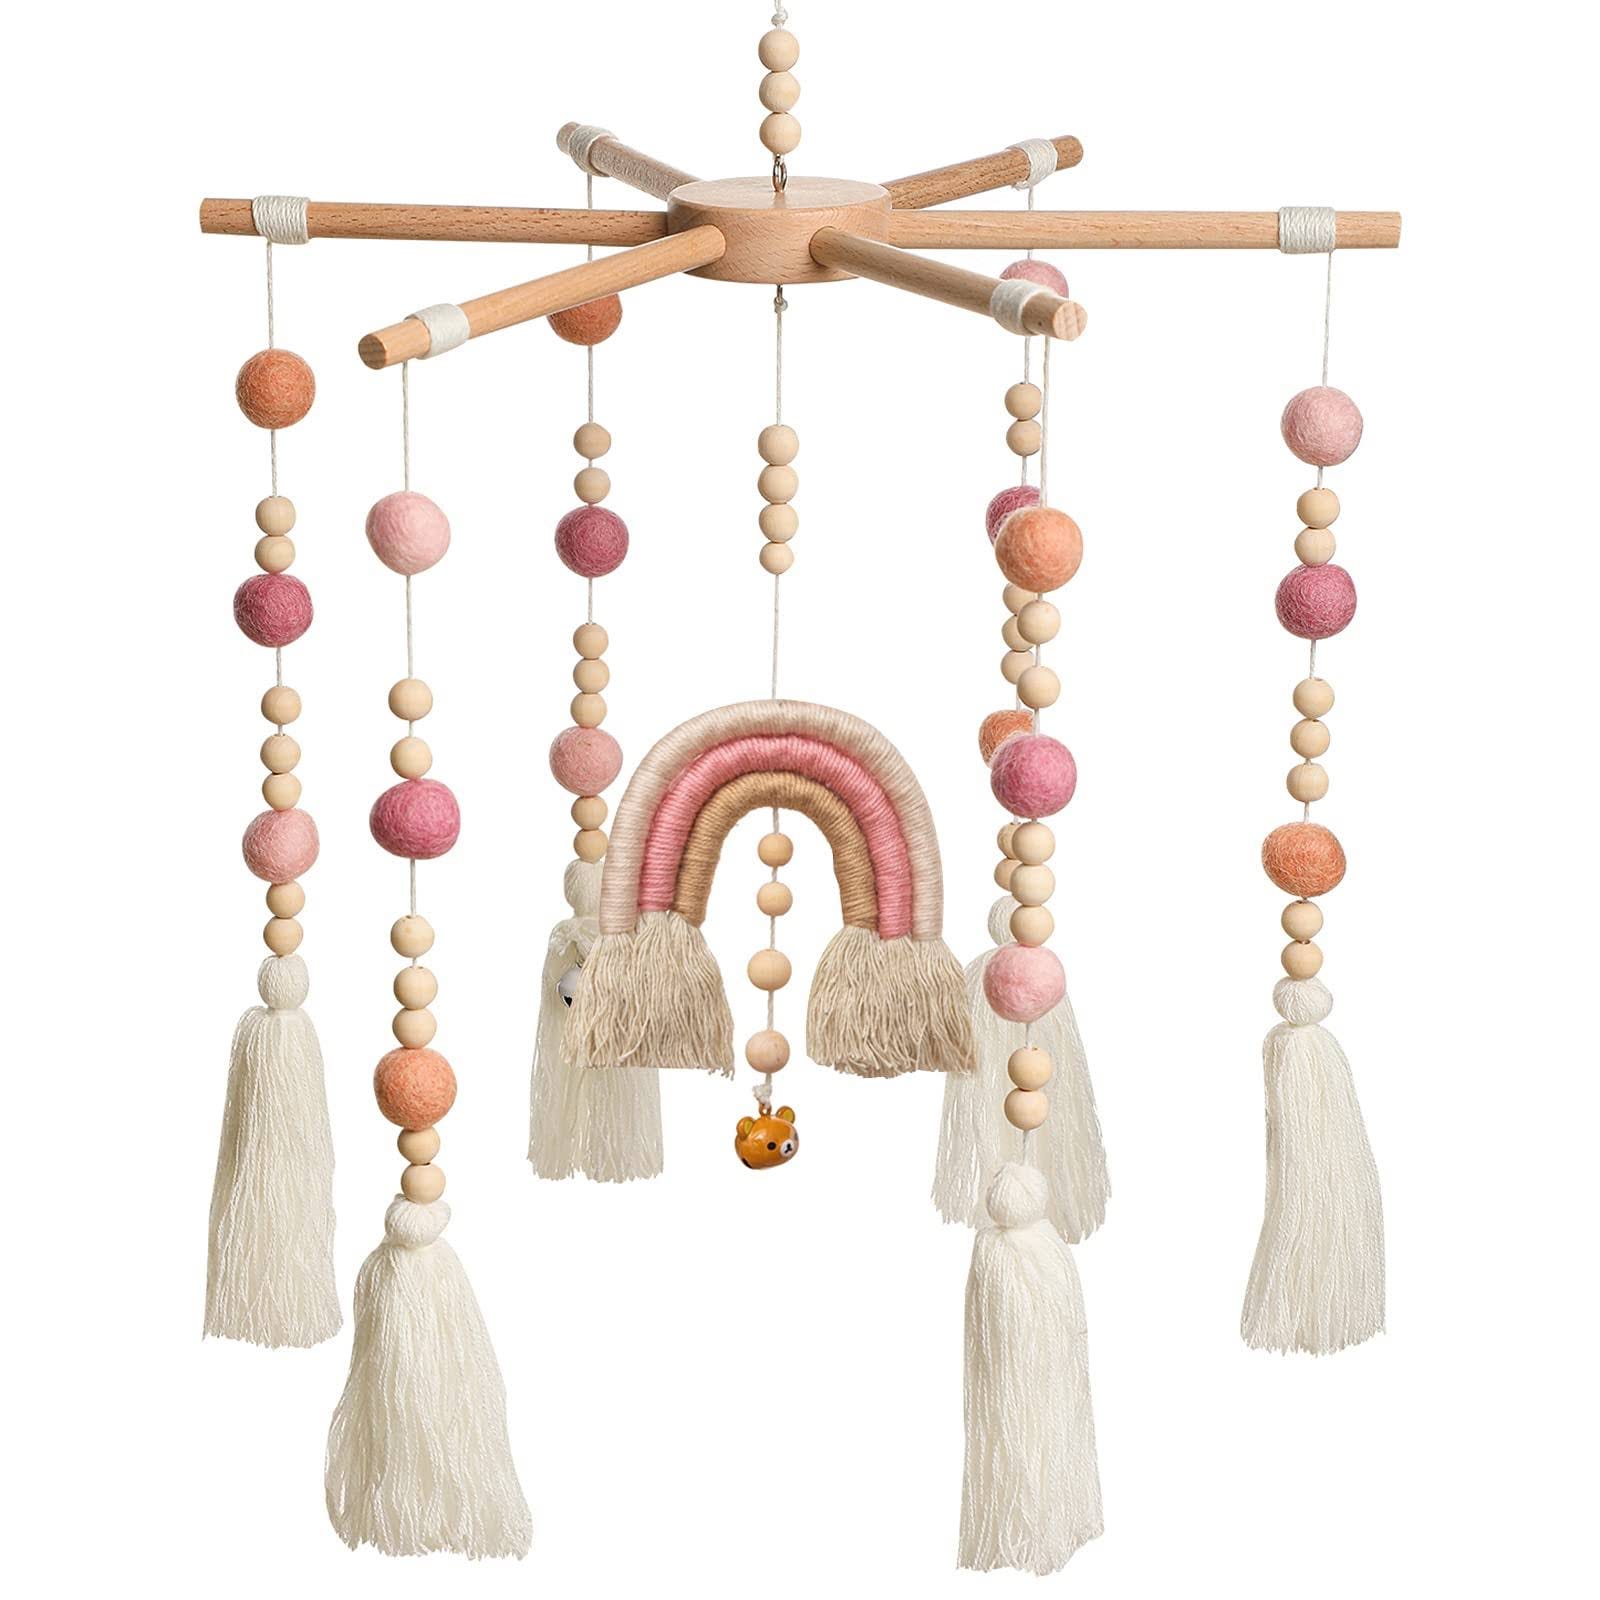 Rainbow Wooden Baby Mobile for Cribs and Car Seats | Image